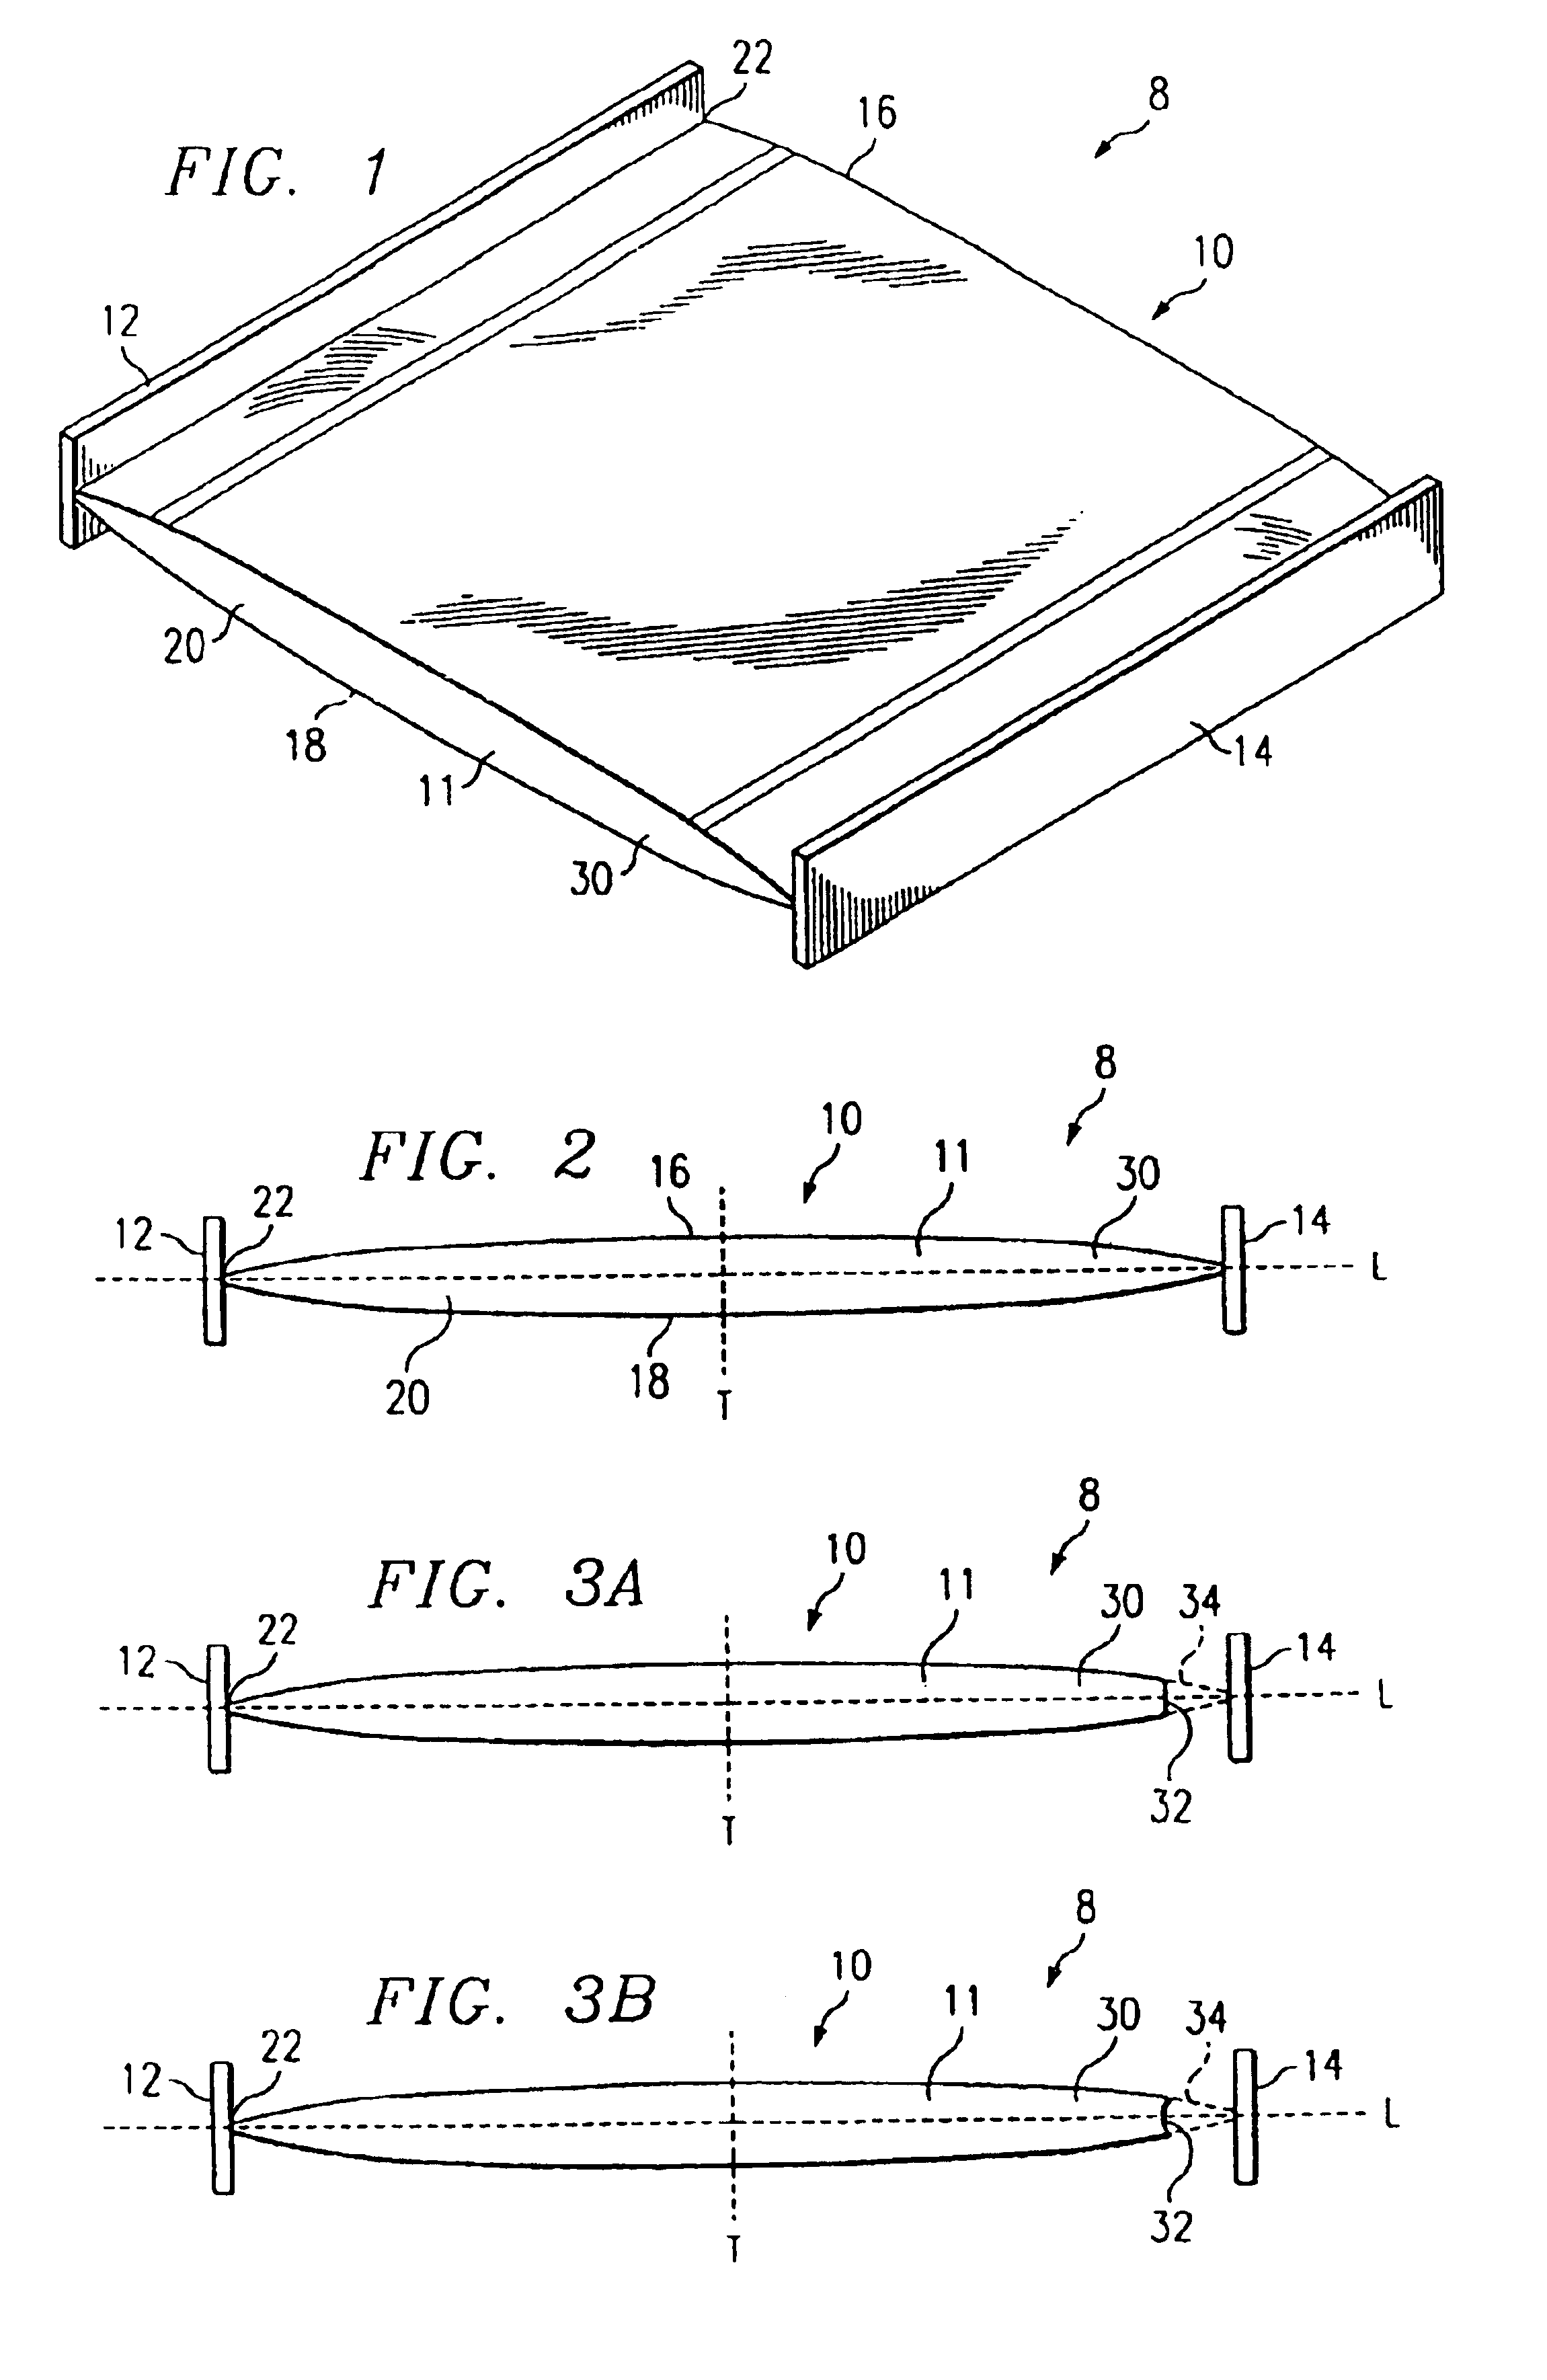 Waveguide device and optical transfer system for directing light to an image plane